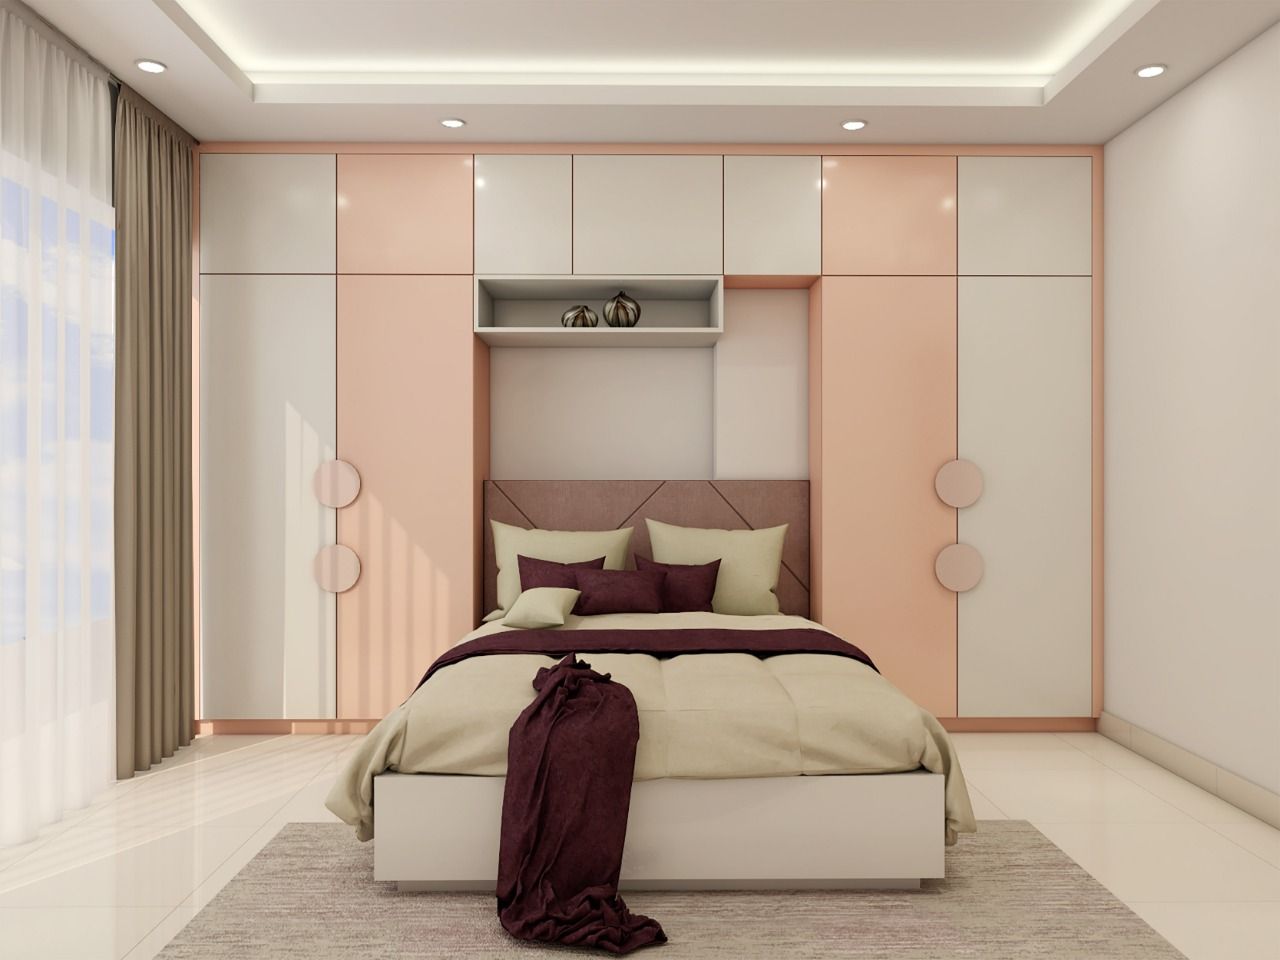 Kids Room with murphy bed and side tall wardrobes homify Teen bedroom kids bedroom, small kids room , murphy bed, kids room wardrobe